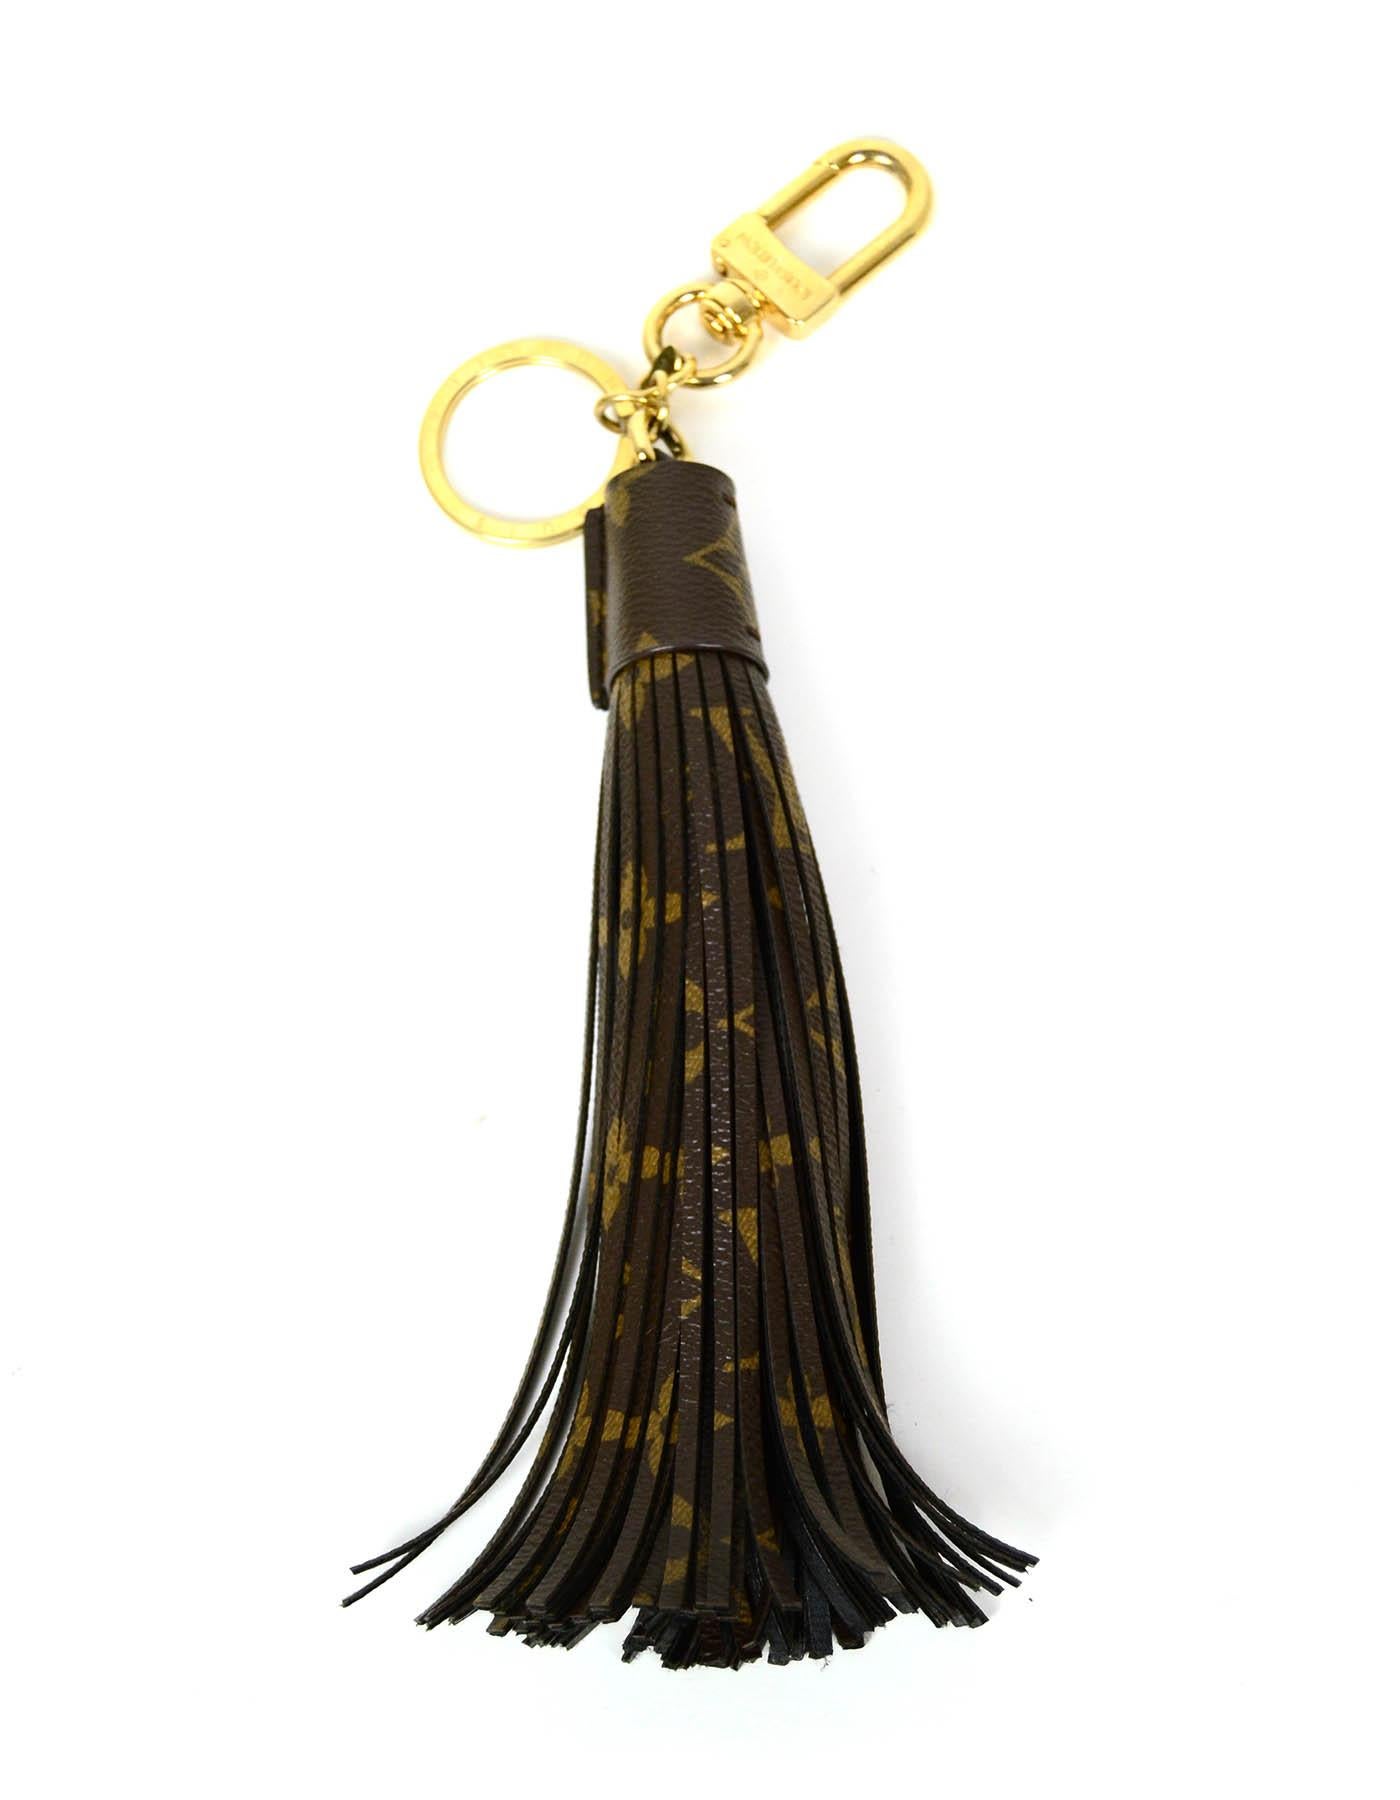 Louis Vuitton Monogram Tassel Bag Charm/ Key Ring

Made In: Italy
Color: Brown 
Hardware: Goldtone
Materials: Coated canvas, metal
Condition: Excellent pre-owned condition

Measurements:
10.75